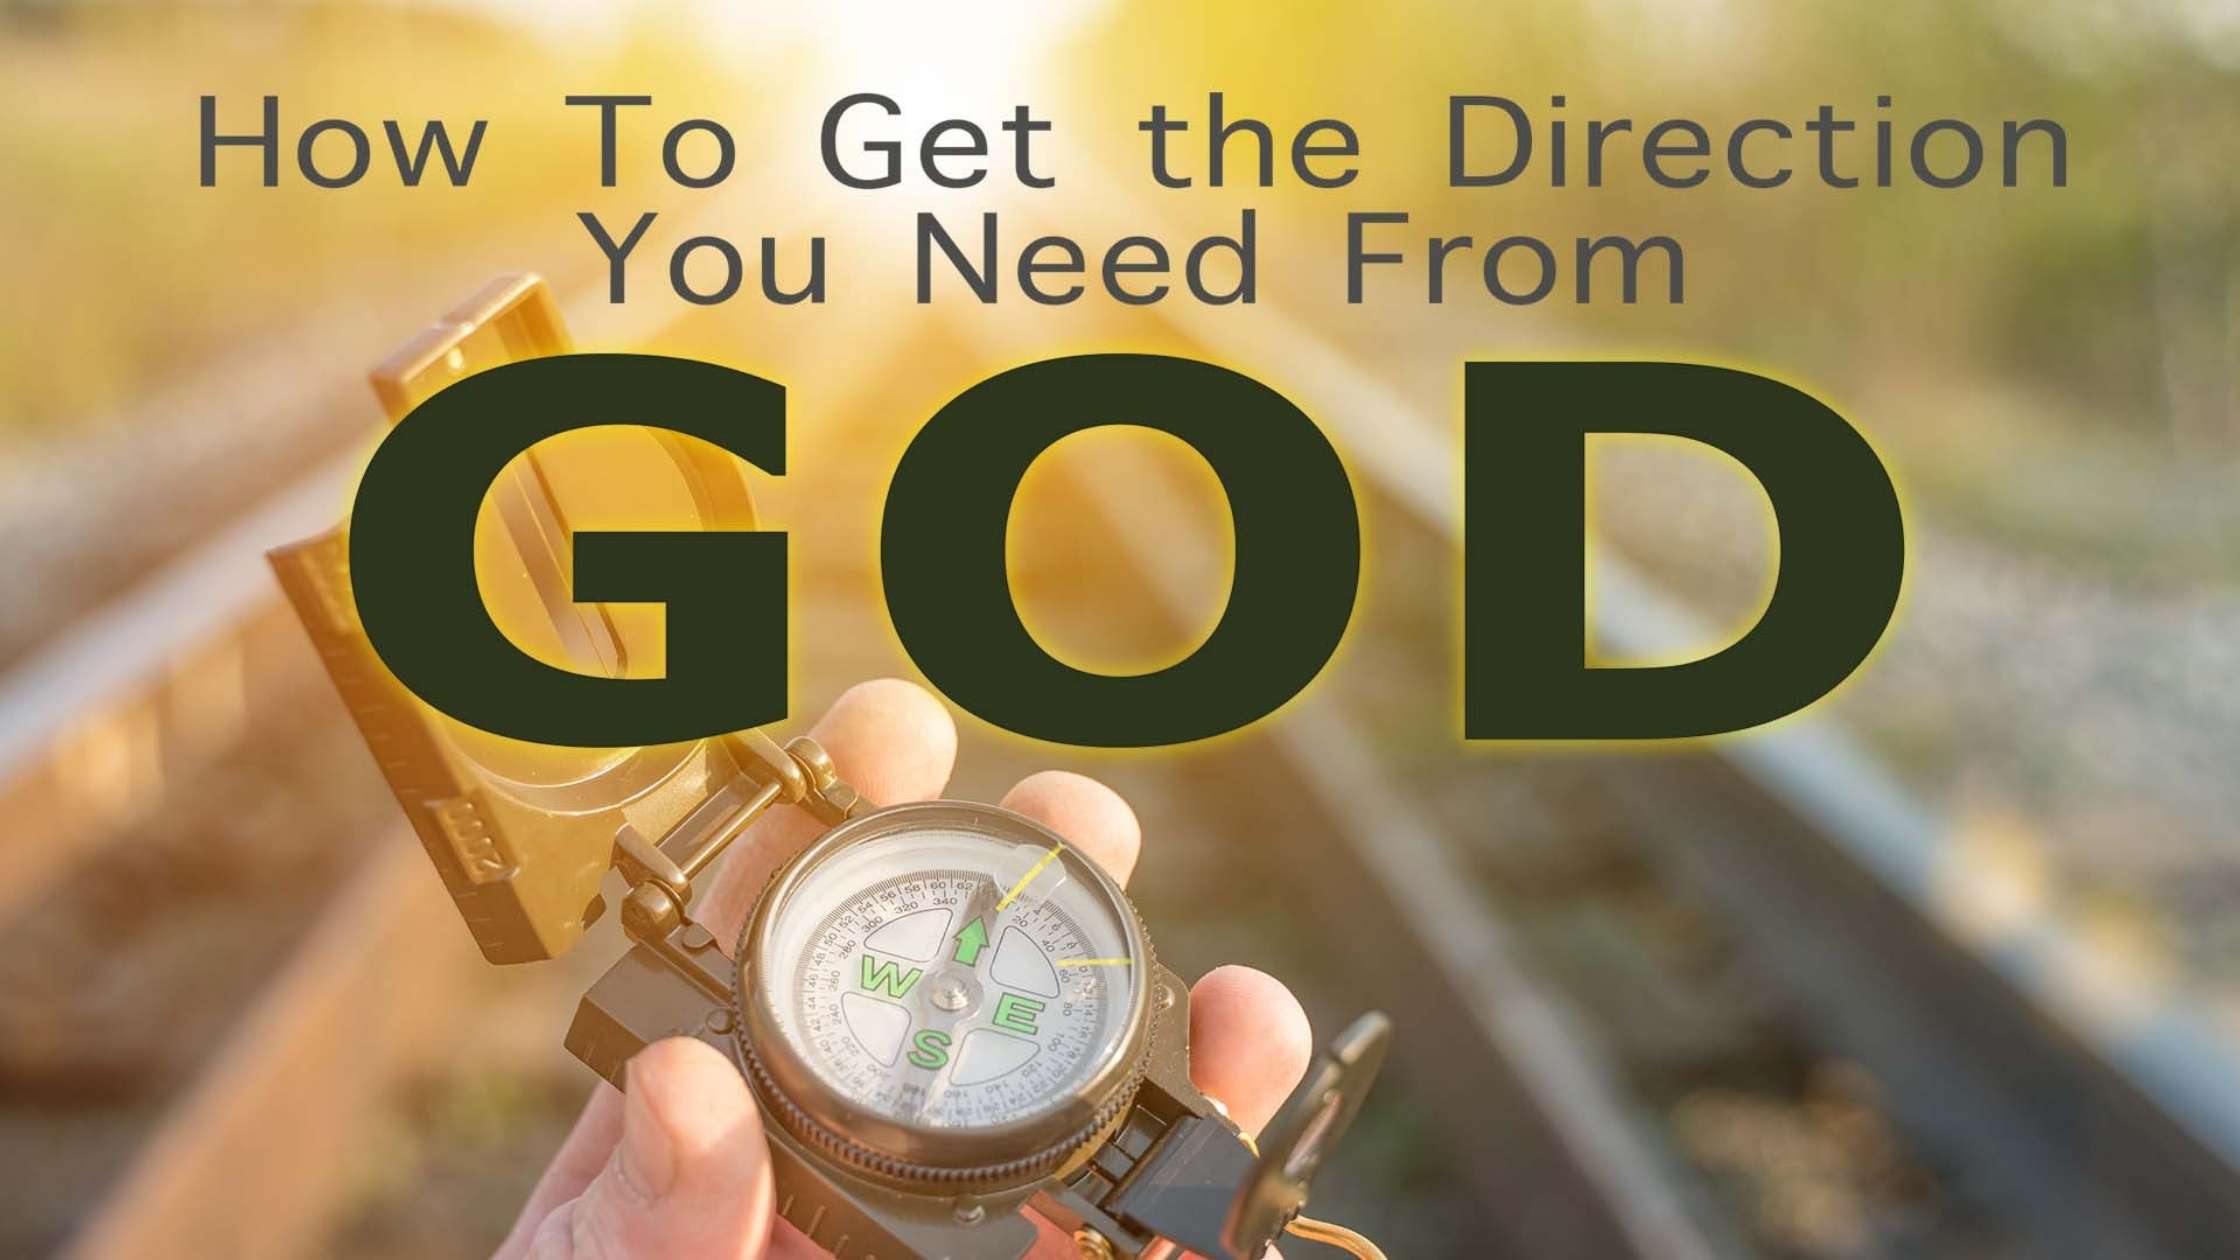 How to Get the Direction You Need From God